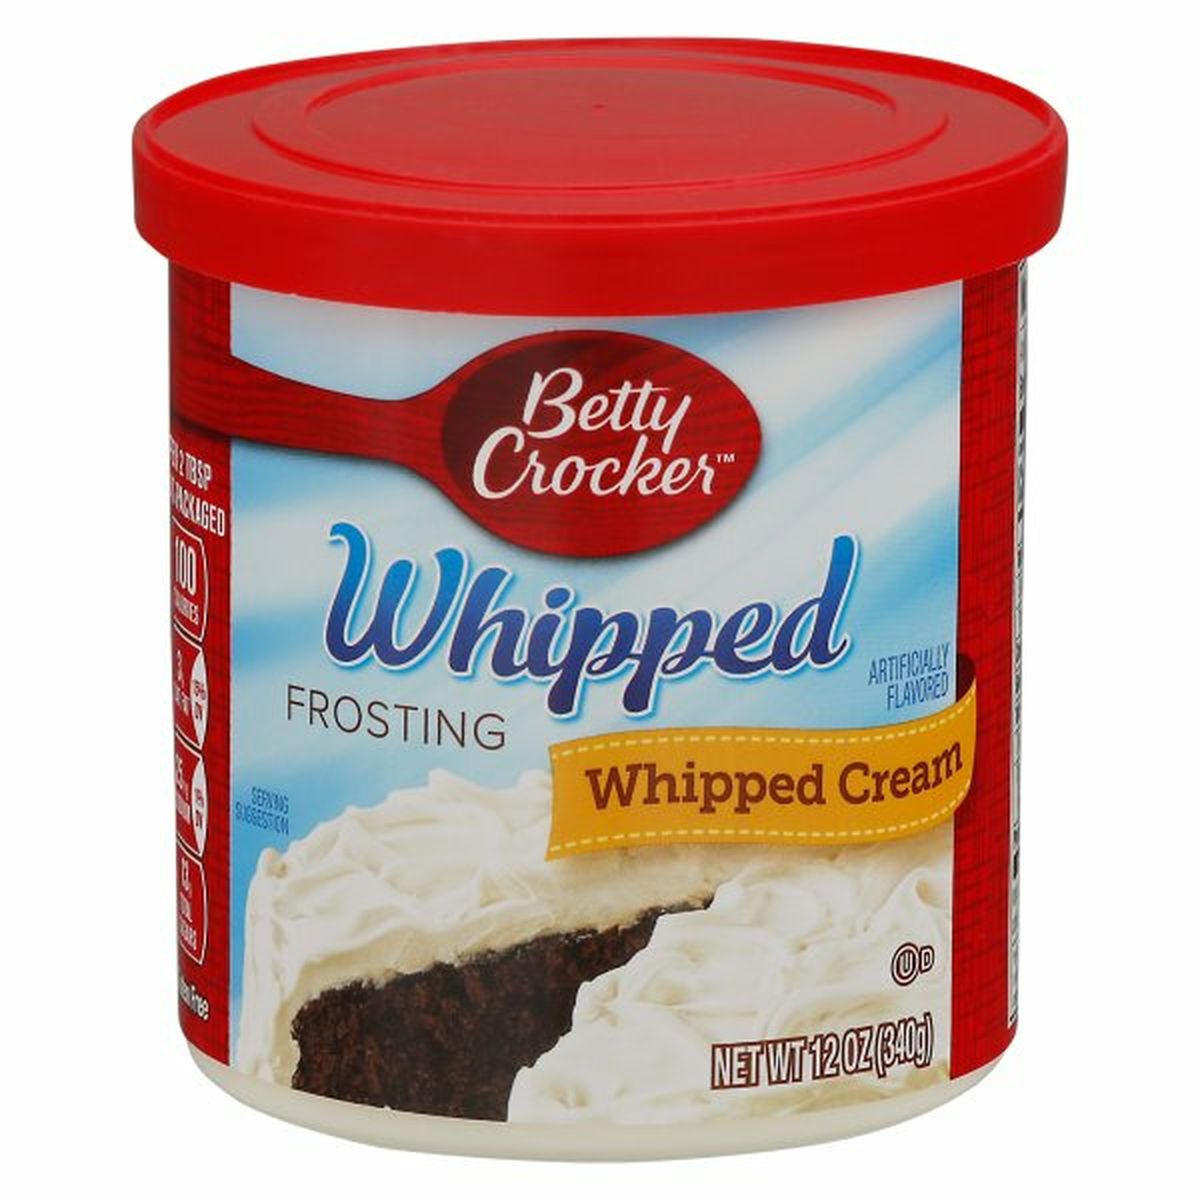 Calories in Betty Crocker Frosting, Whipped Cream